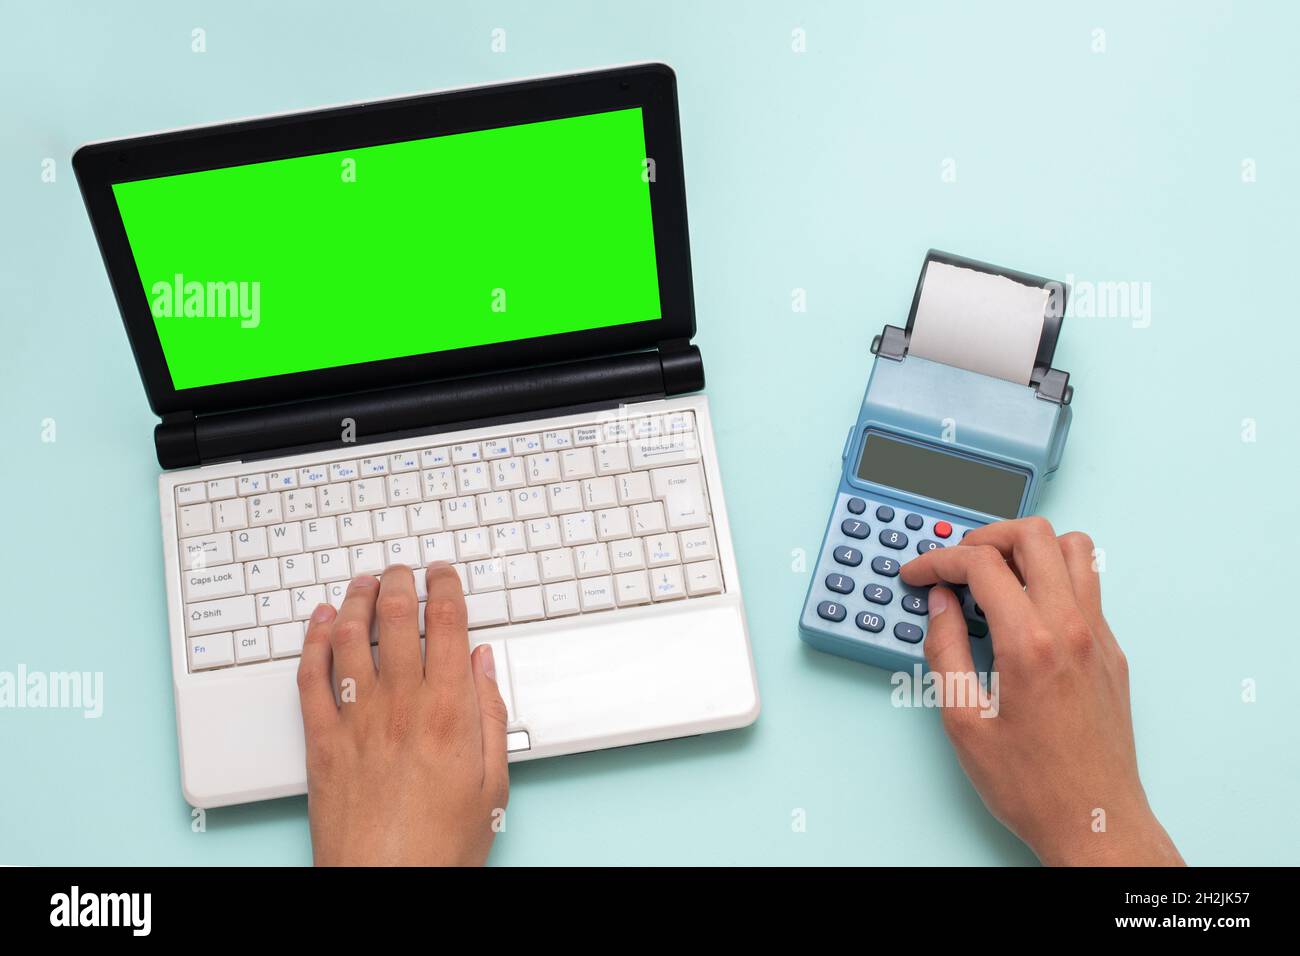 Hand typing on a laptop with a green screen and pressing buttons on a cash register on a blue background, copy space. The cashier selects the item and Stock Photo